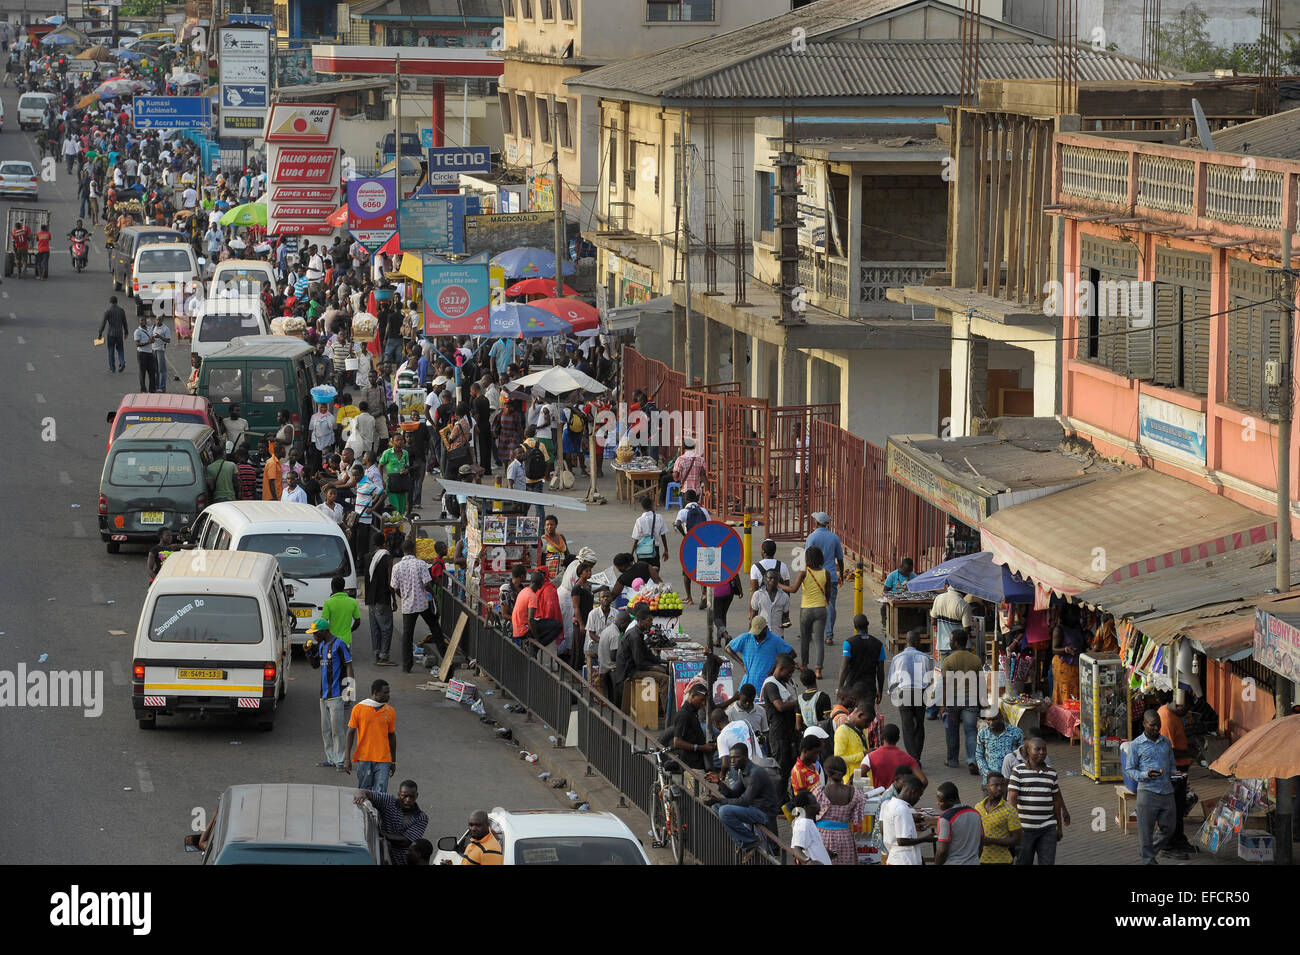 Pedestrians and traffic mix along one of Accra, Ghana's main thoroughfares. Stock Photo